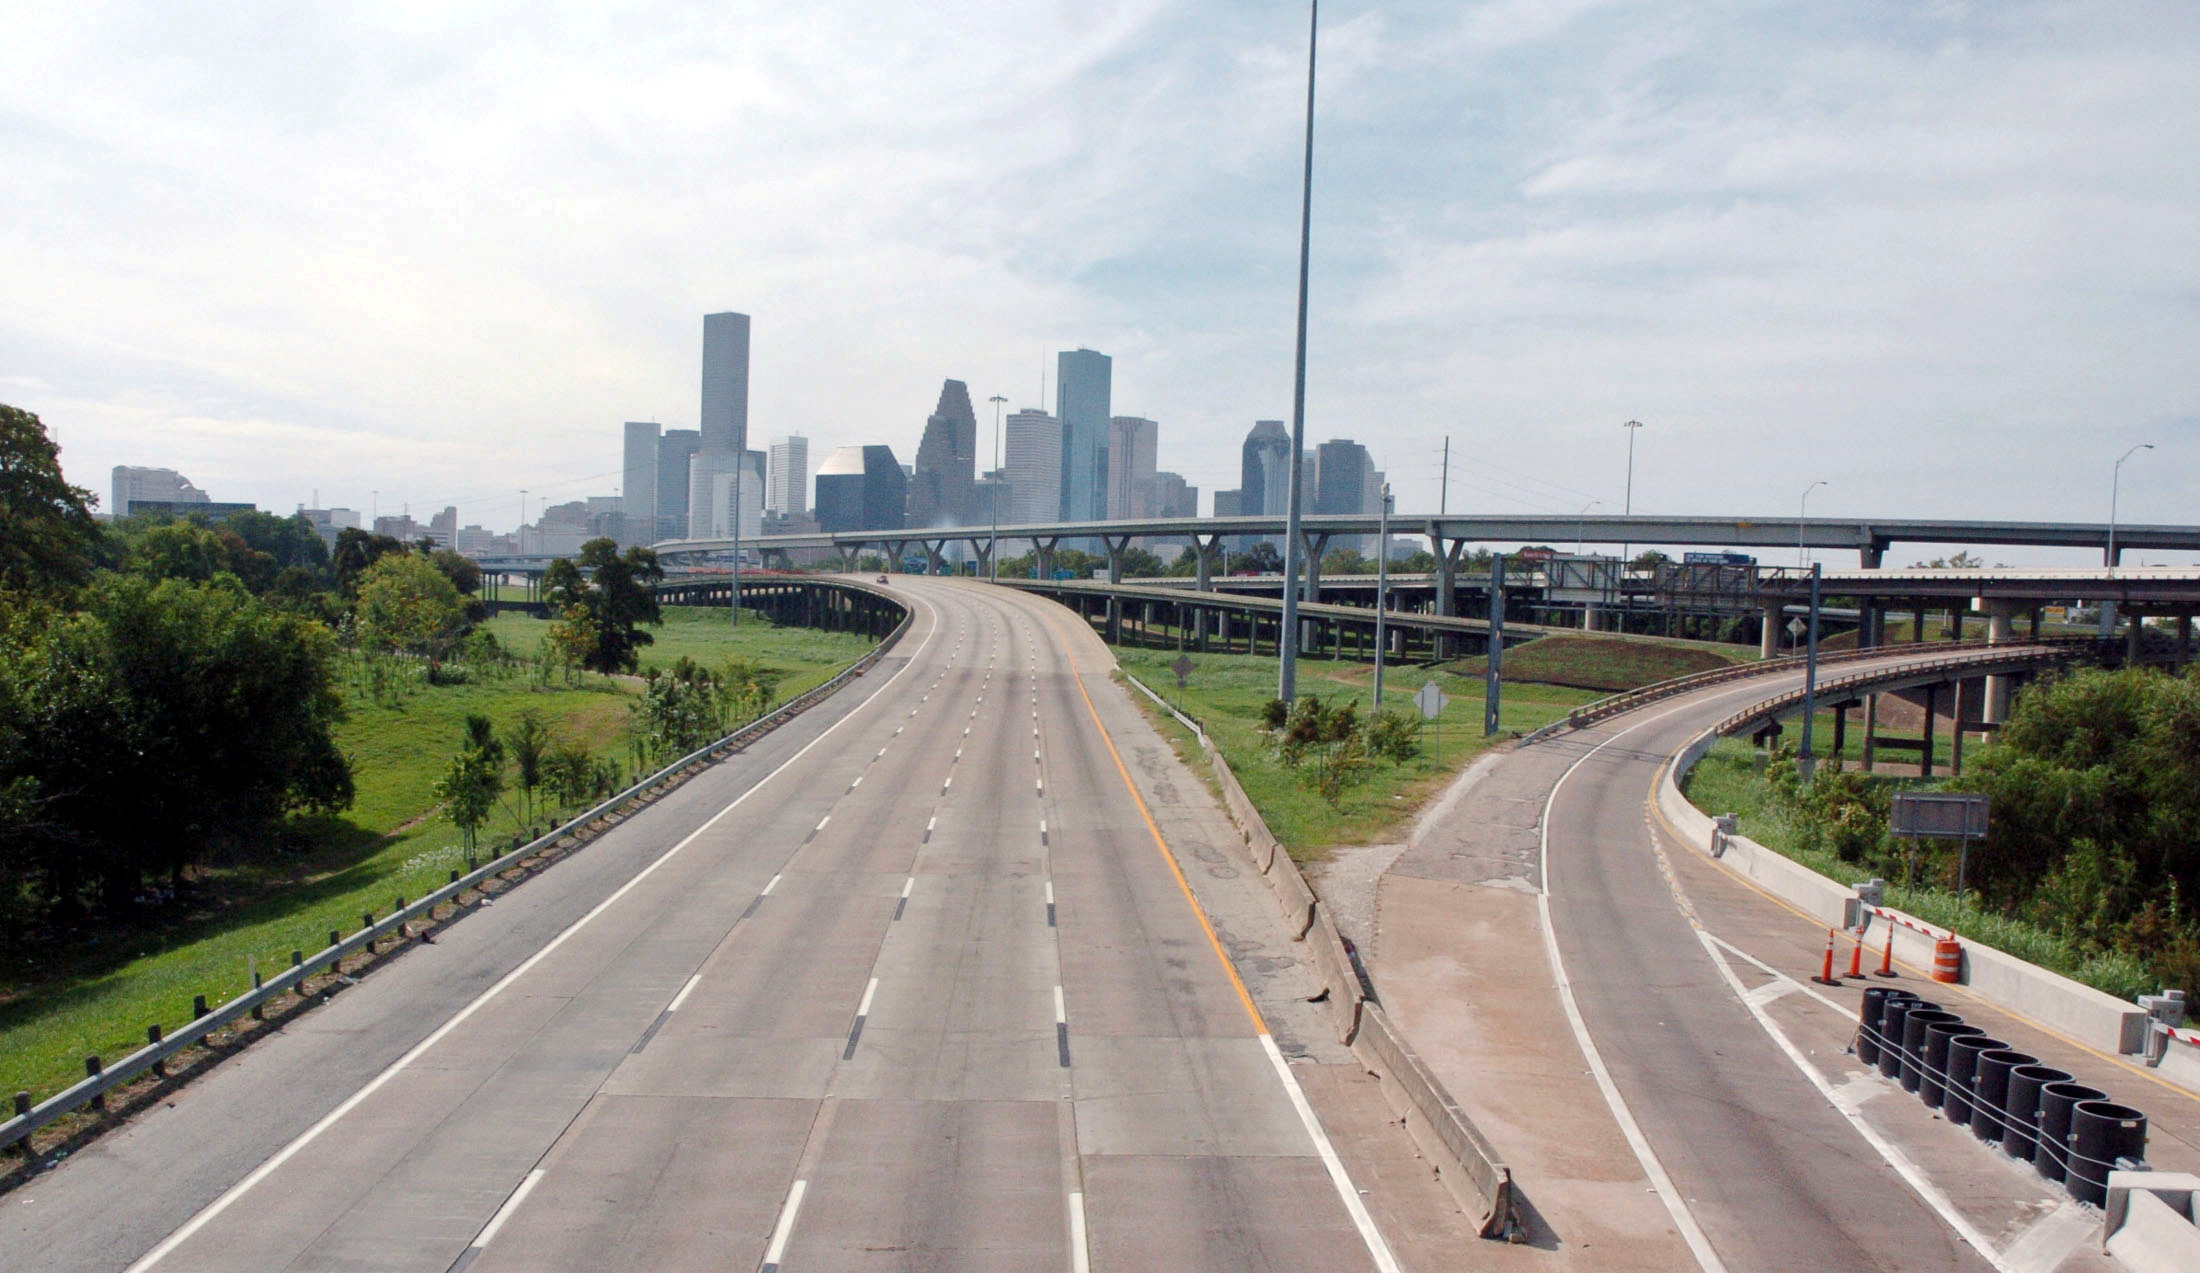 A view of the Houston freeways at I-45 North